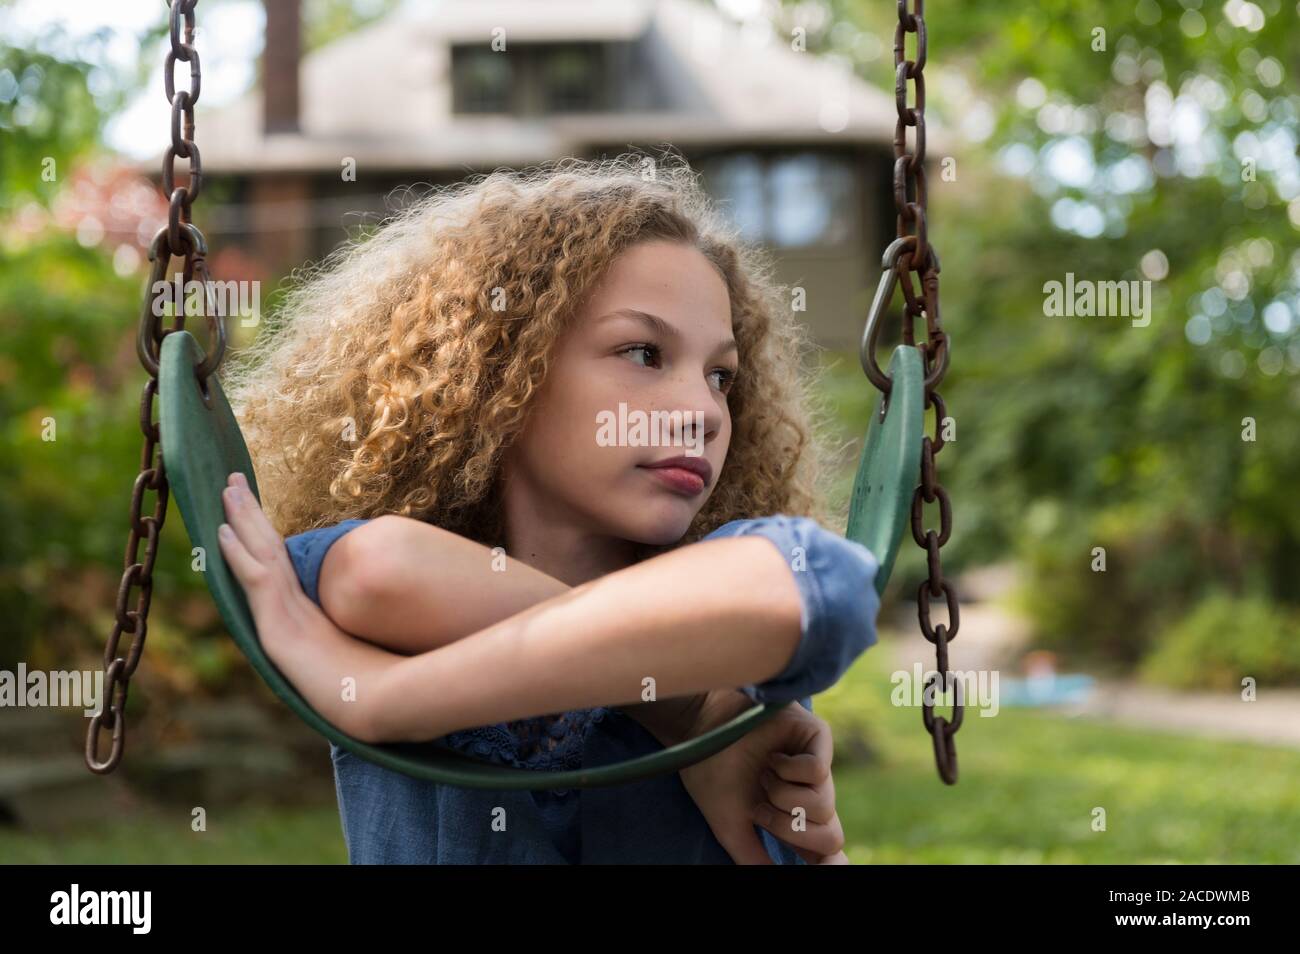 Girl leaning on swing Stock Photo